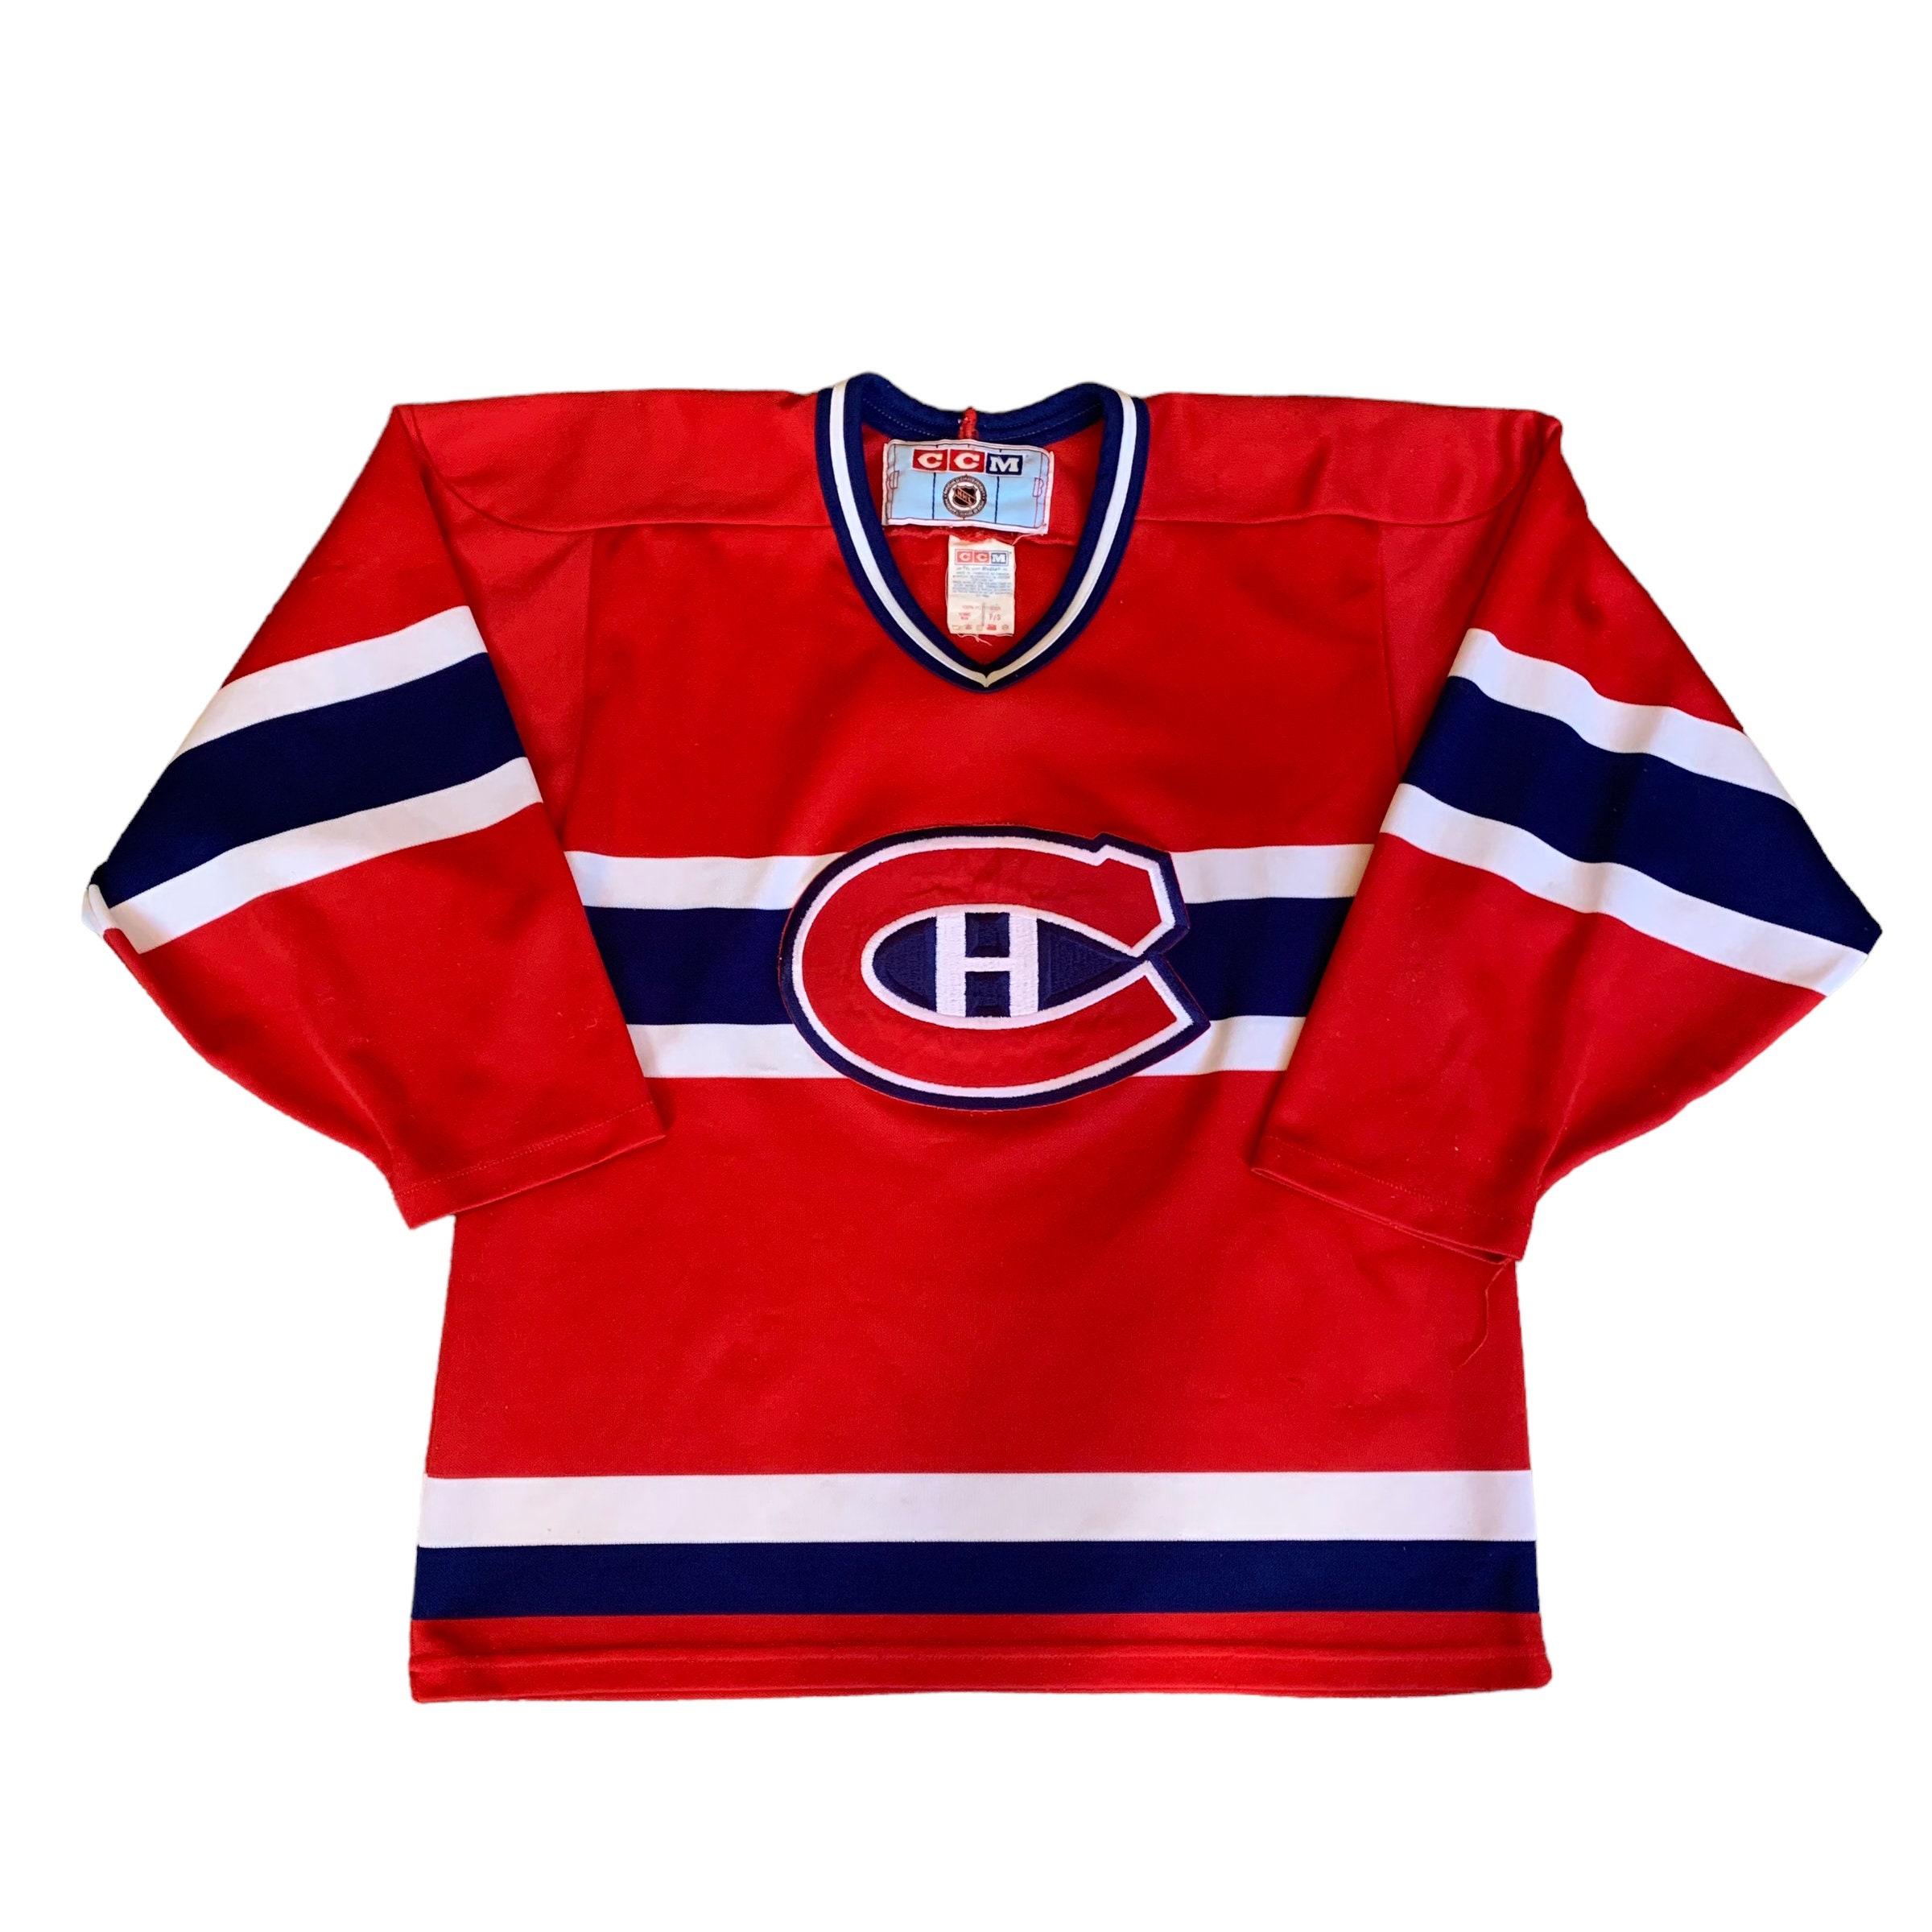 Pk Subban Autographed Montreal Canadiens Red Fanatics Jersey